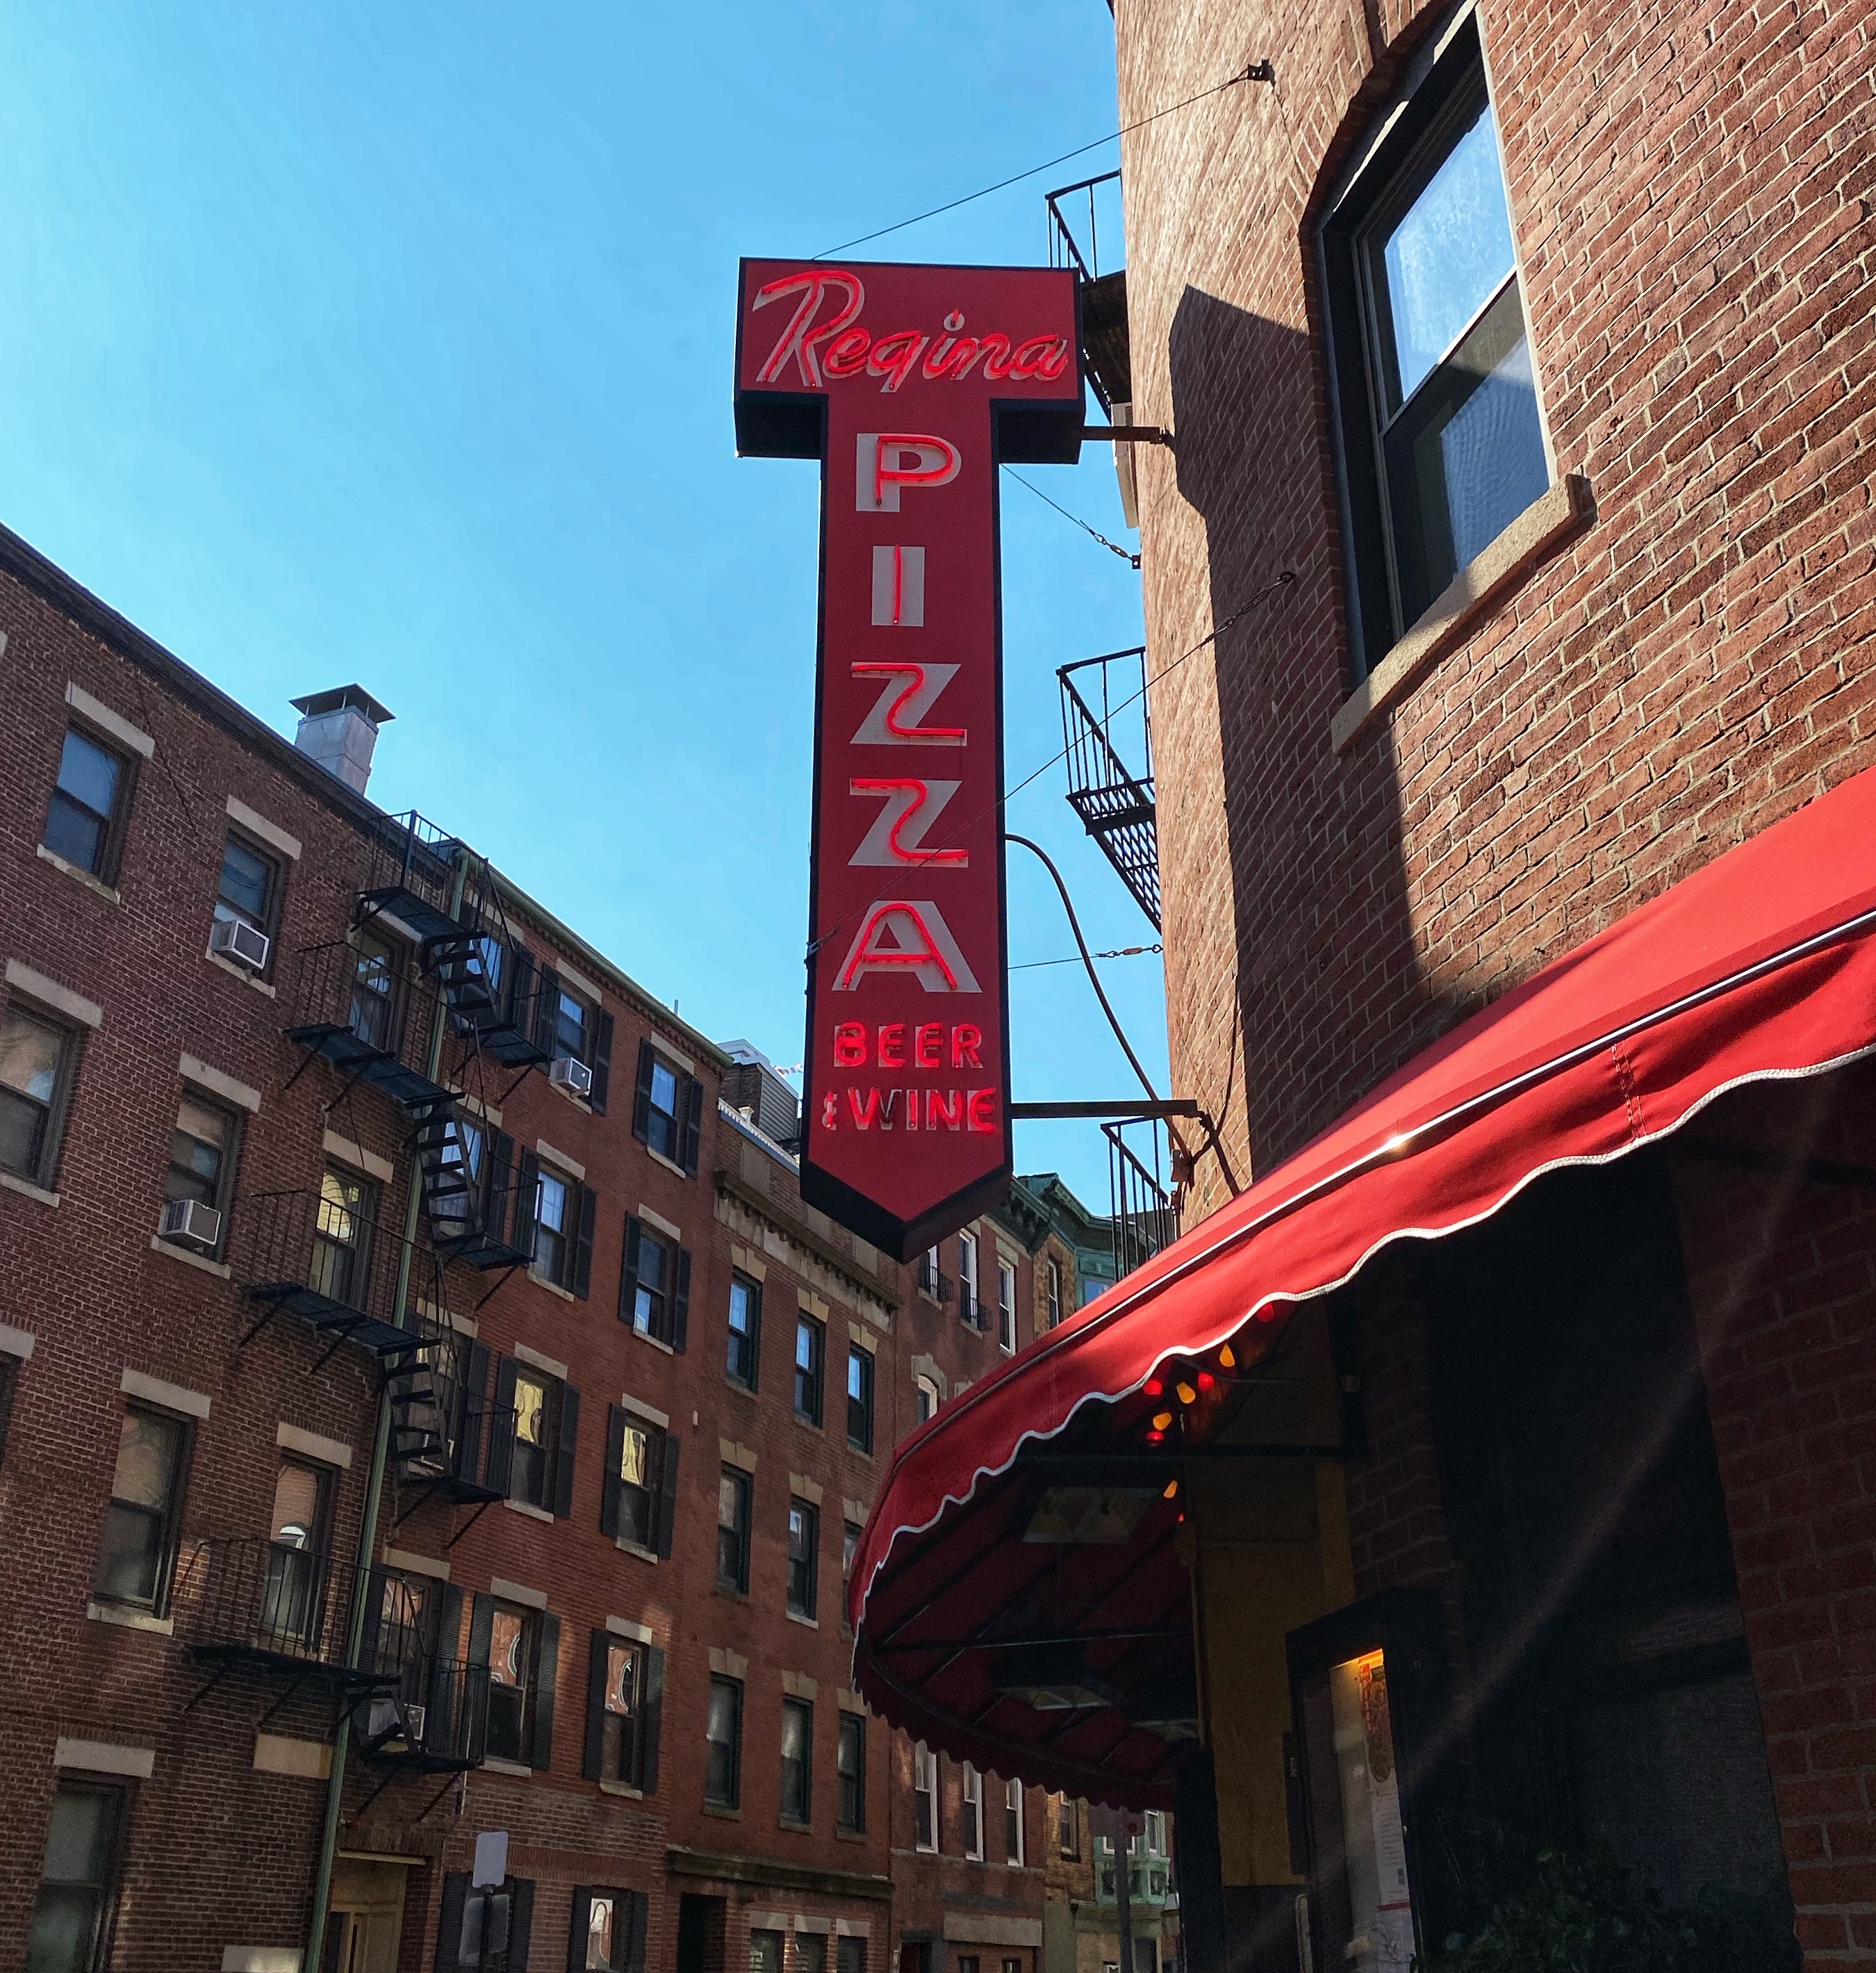 A sign for Regina Pizzeria hangs on the corner of a building with a red awning beneath the neon sign.